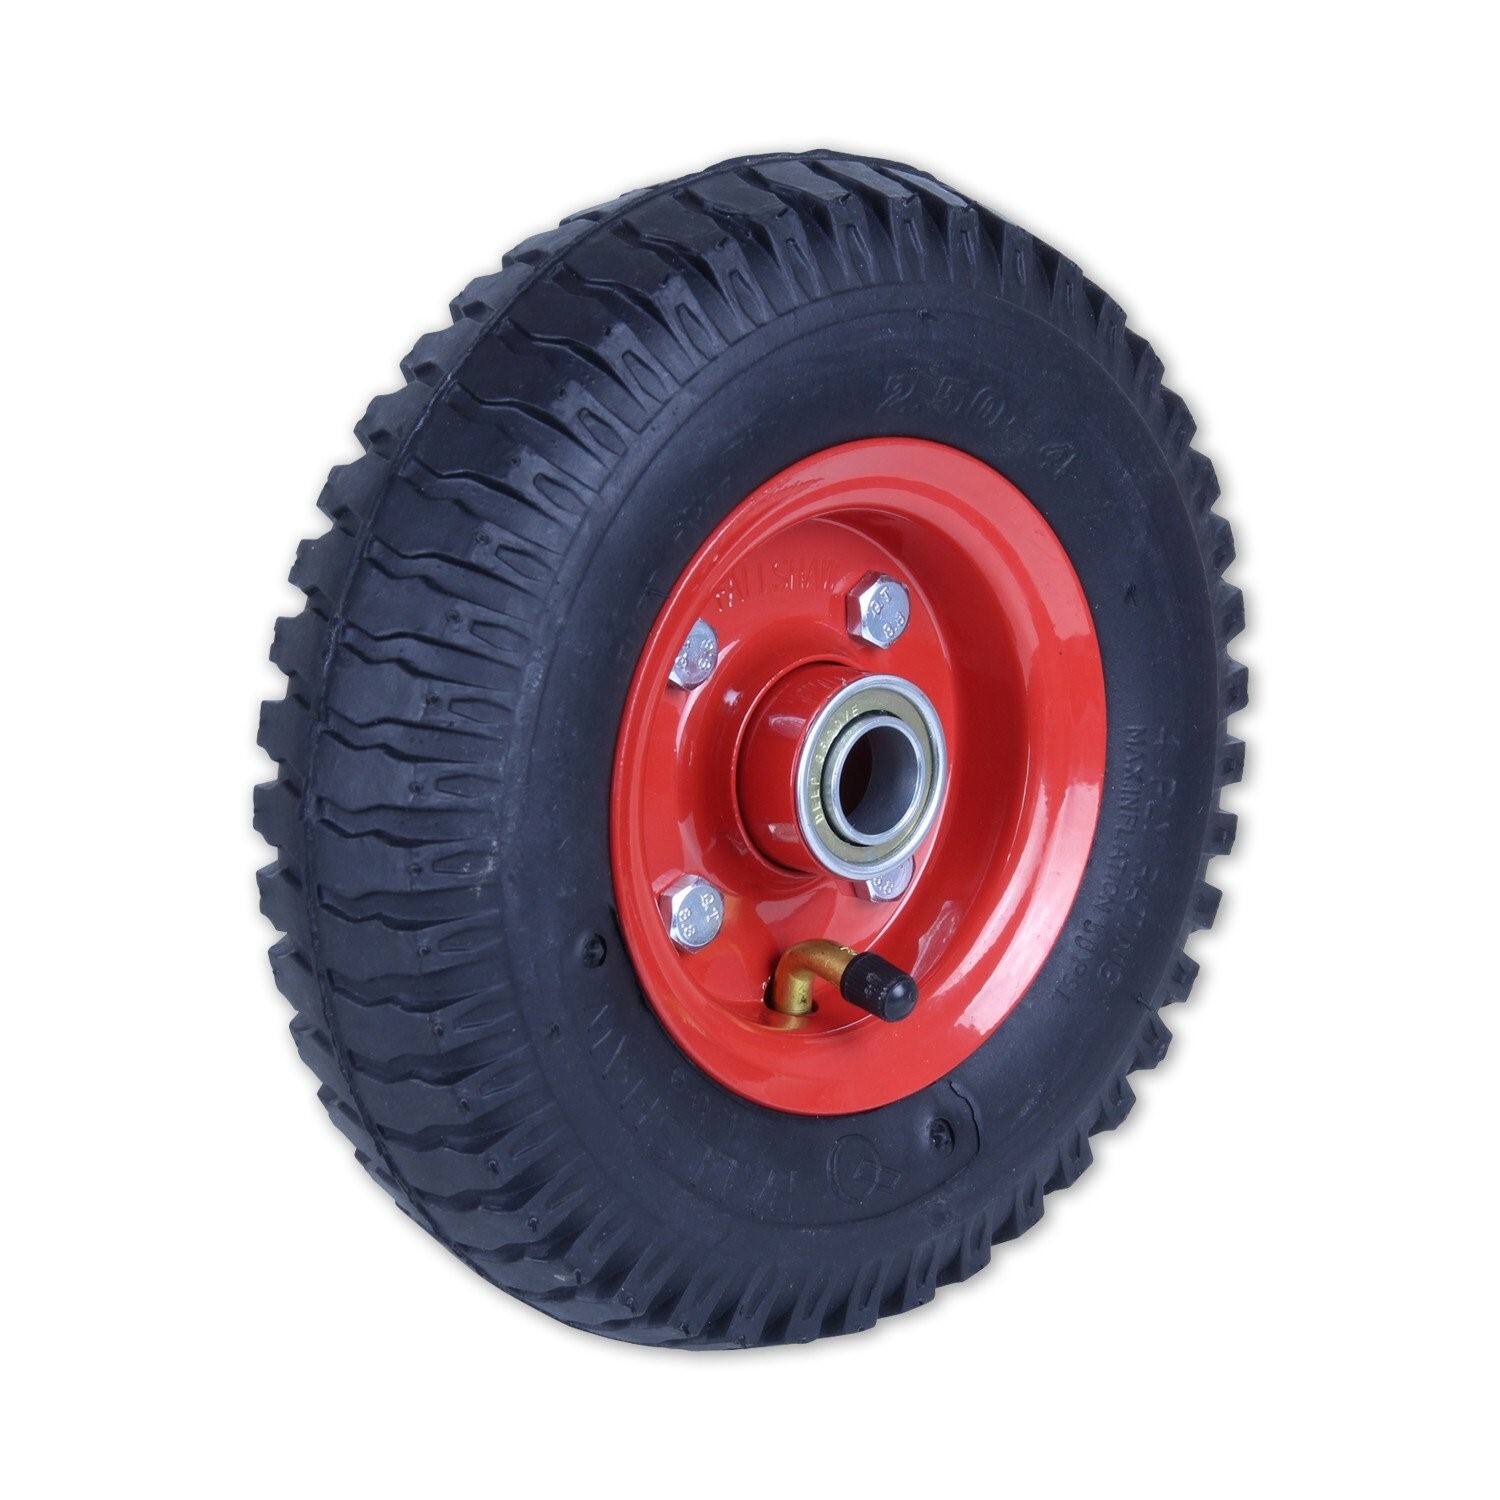 120kg Rated Pneumatic Wheel Tyre - Steel Centre - 220mm x 54mm - Deep Groove Bearing